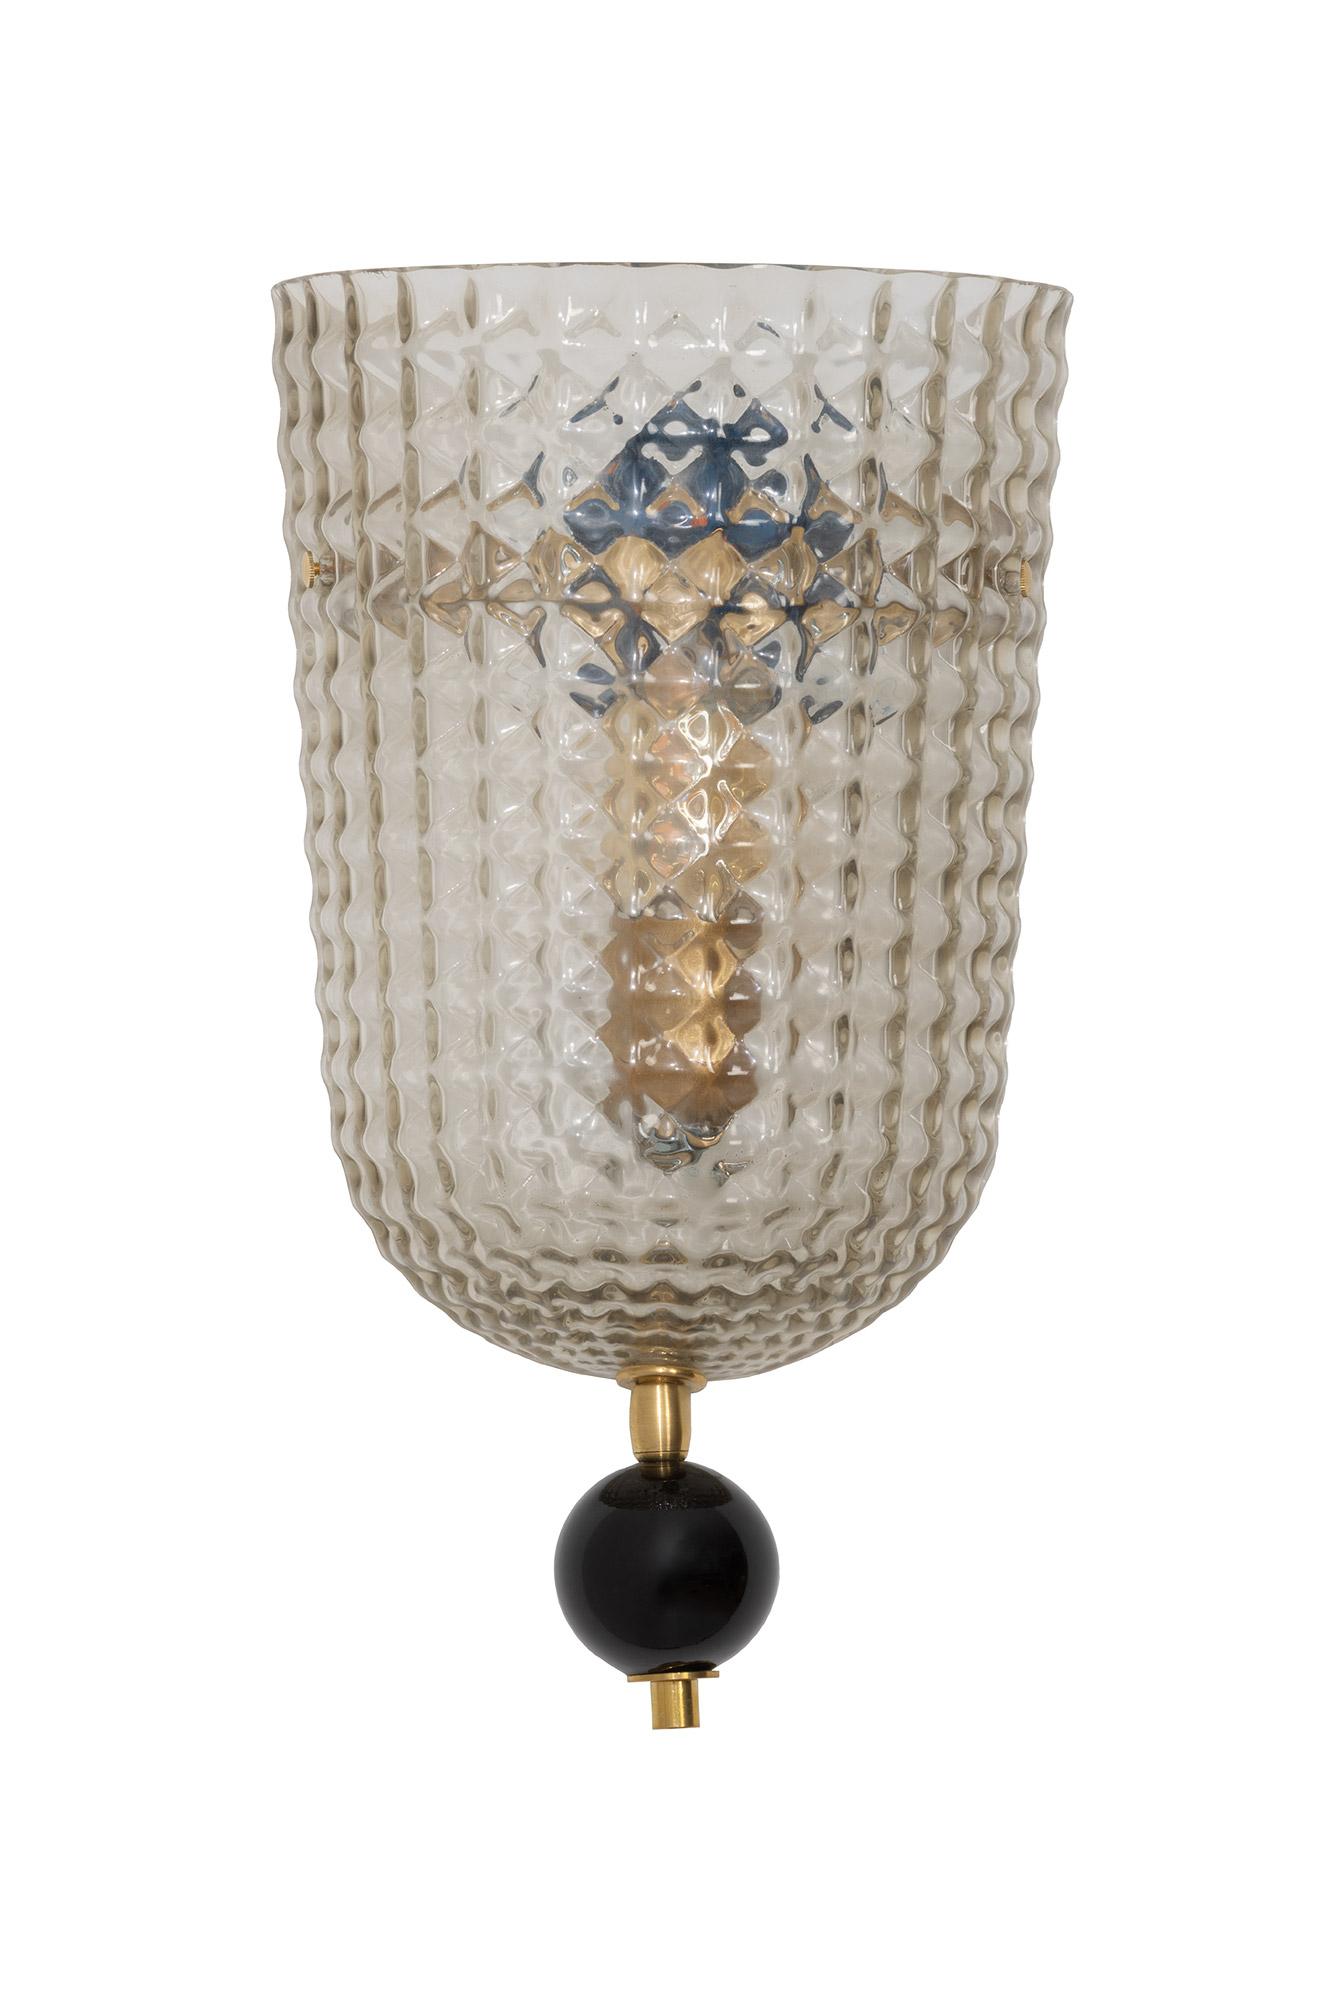 Pair of Art Deco style Murano glass demilune wall sconces, in stock
Black glass sphere and brass fittings.
Textured Murano glass,
Wired to the American standard
Located in our store in Miami ready for shipping.
Free shipping Continental US 
Standard